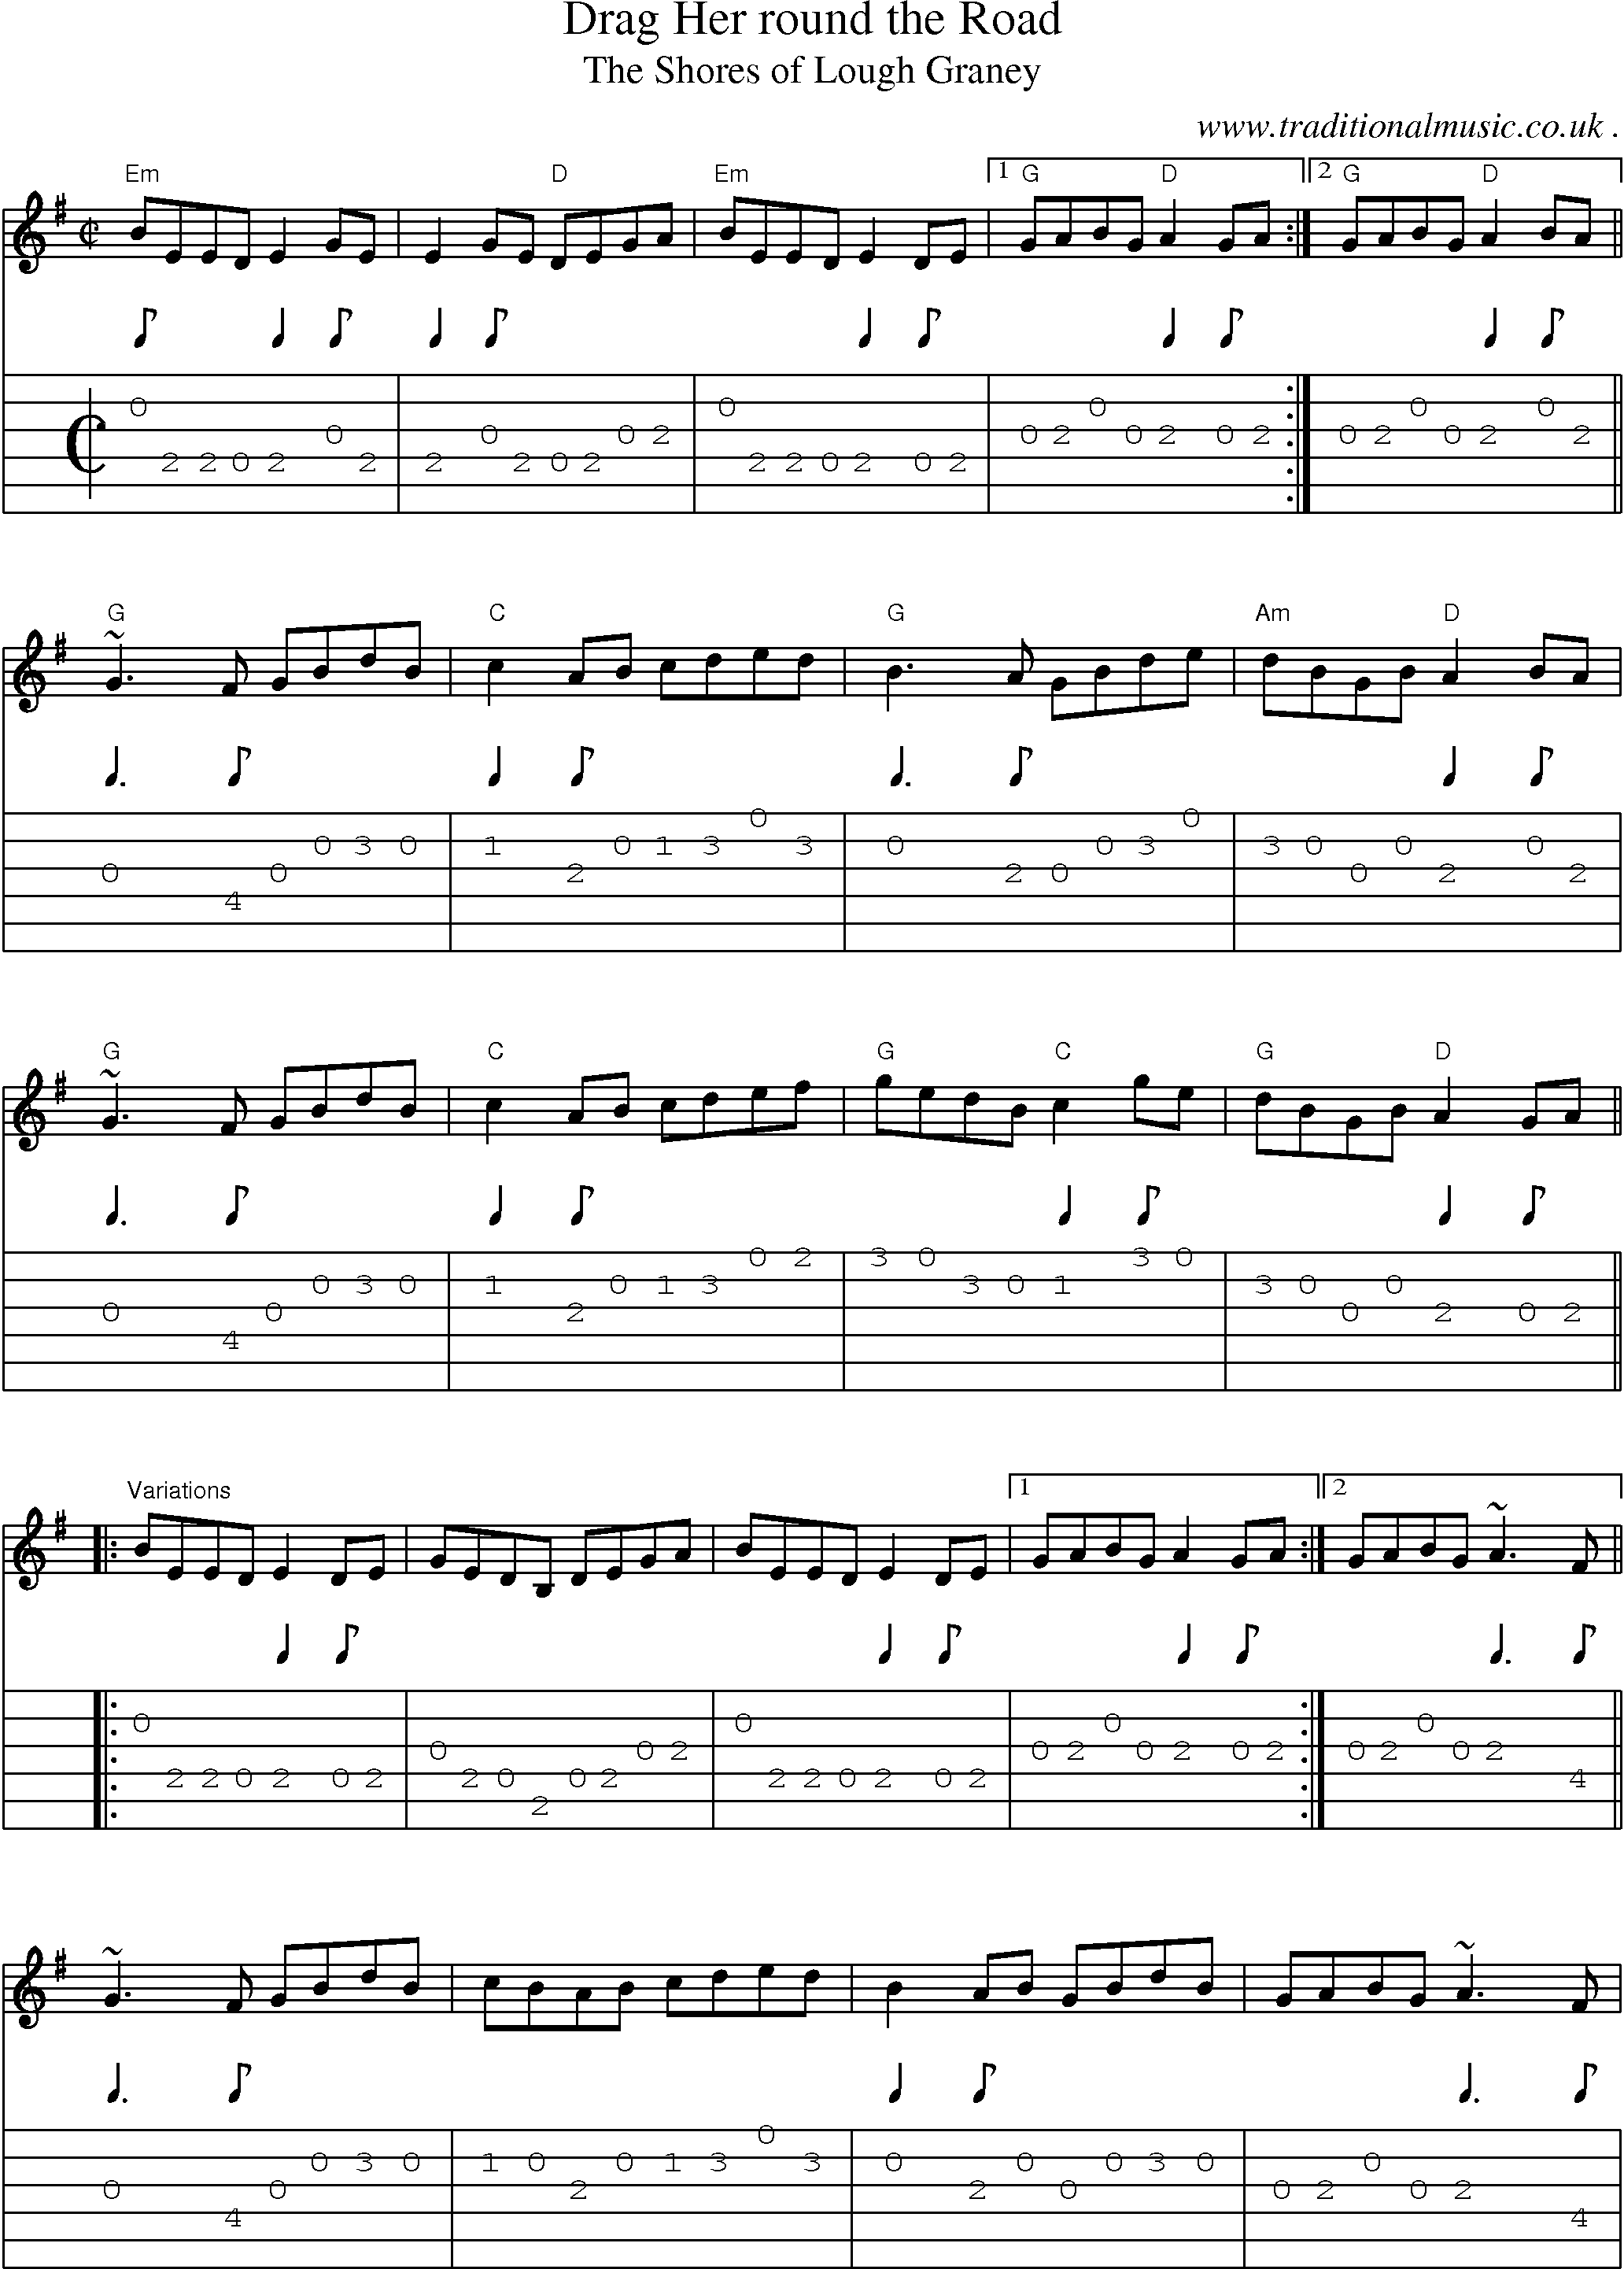 Music Score and Guitar Tabs for Drag Her Round The Road